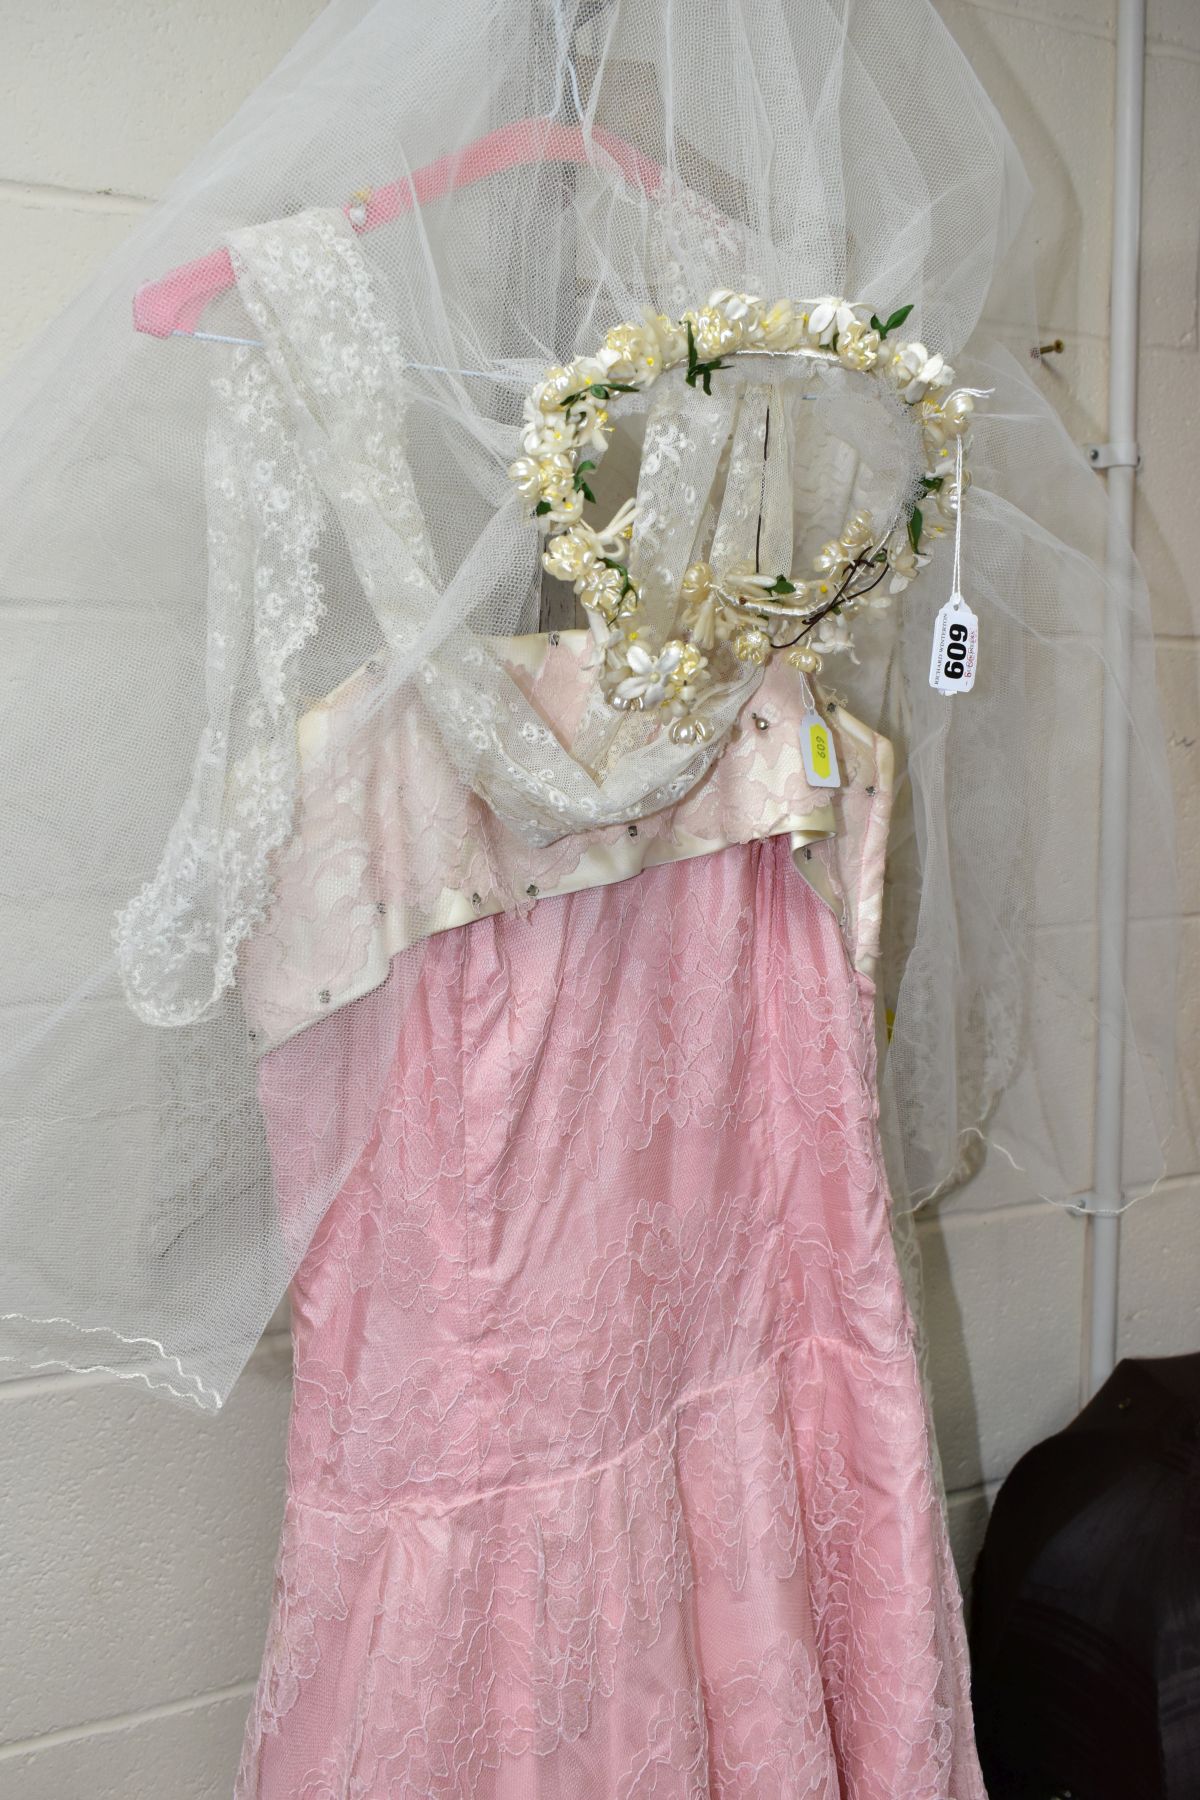 AN ISOBEL LTD OF BIRMINGHAM CREAM LACE OVER SATIN BRIDAL GOWN AND NET VEIL ATTACHED TO FLORAL HEAD - Bild 5 aus 10